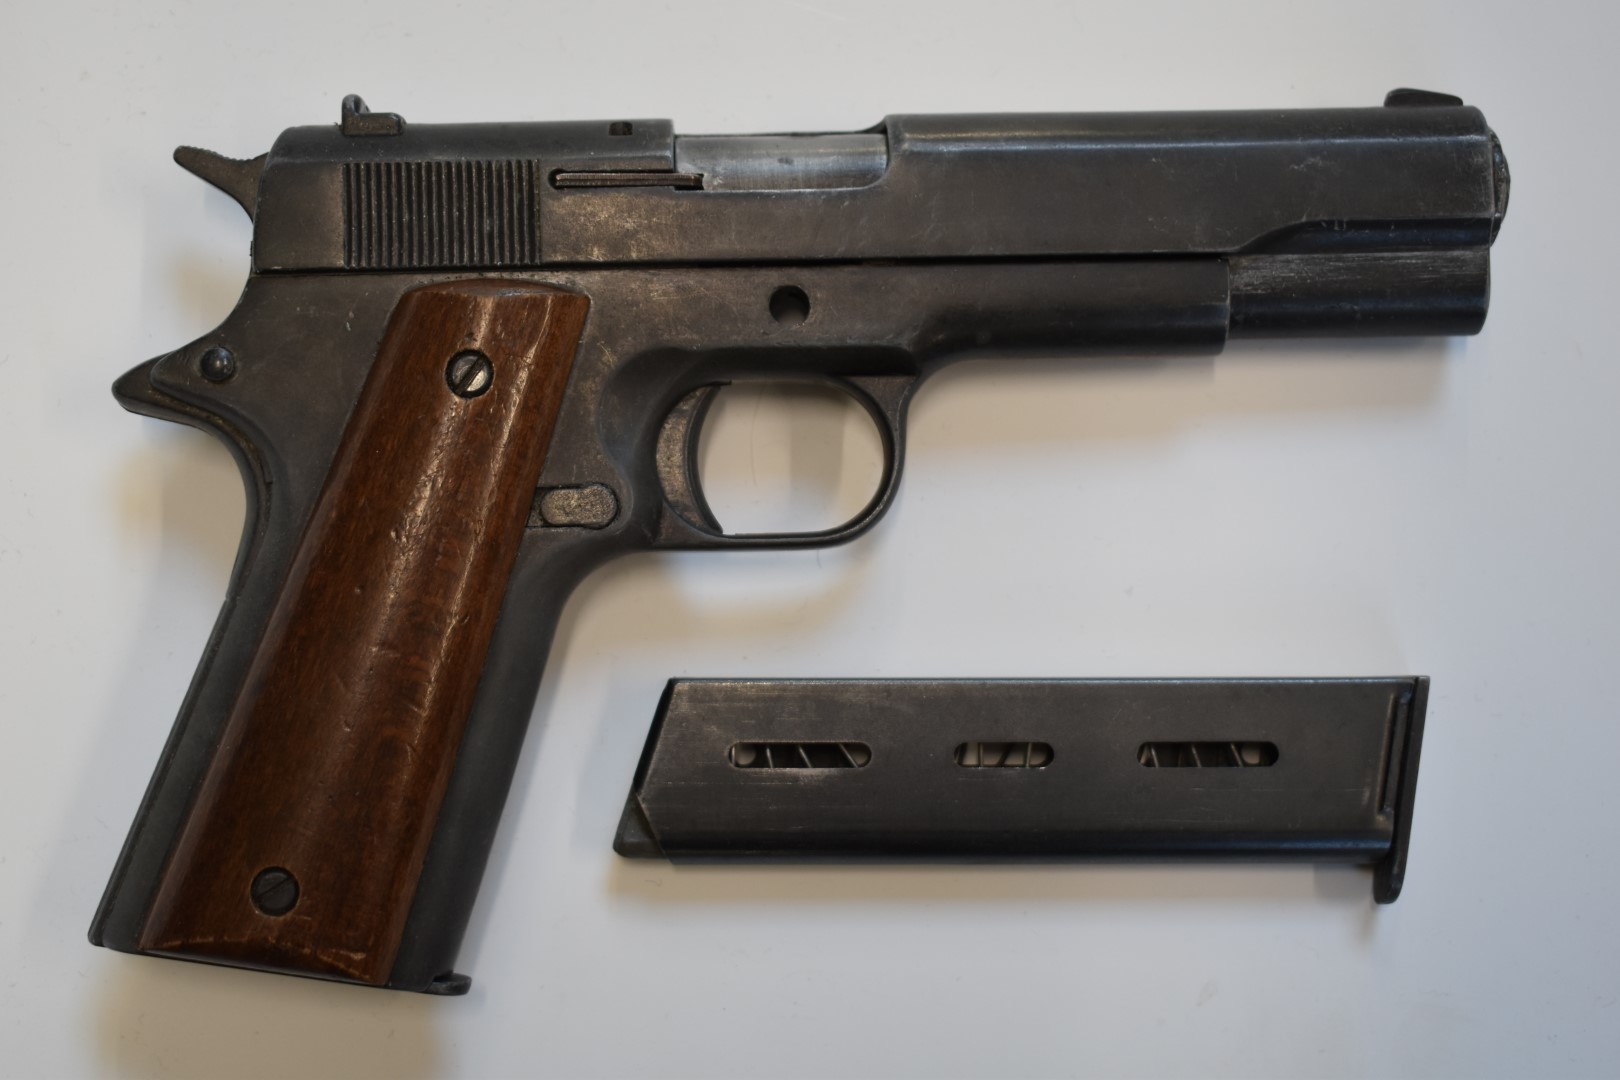 BBM Bruni 96 Automatic 8mm blank firing pistol with wooden grips and a spare magazine.